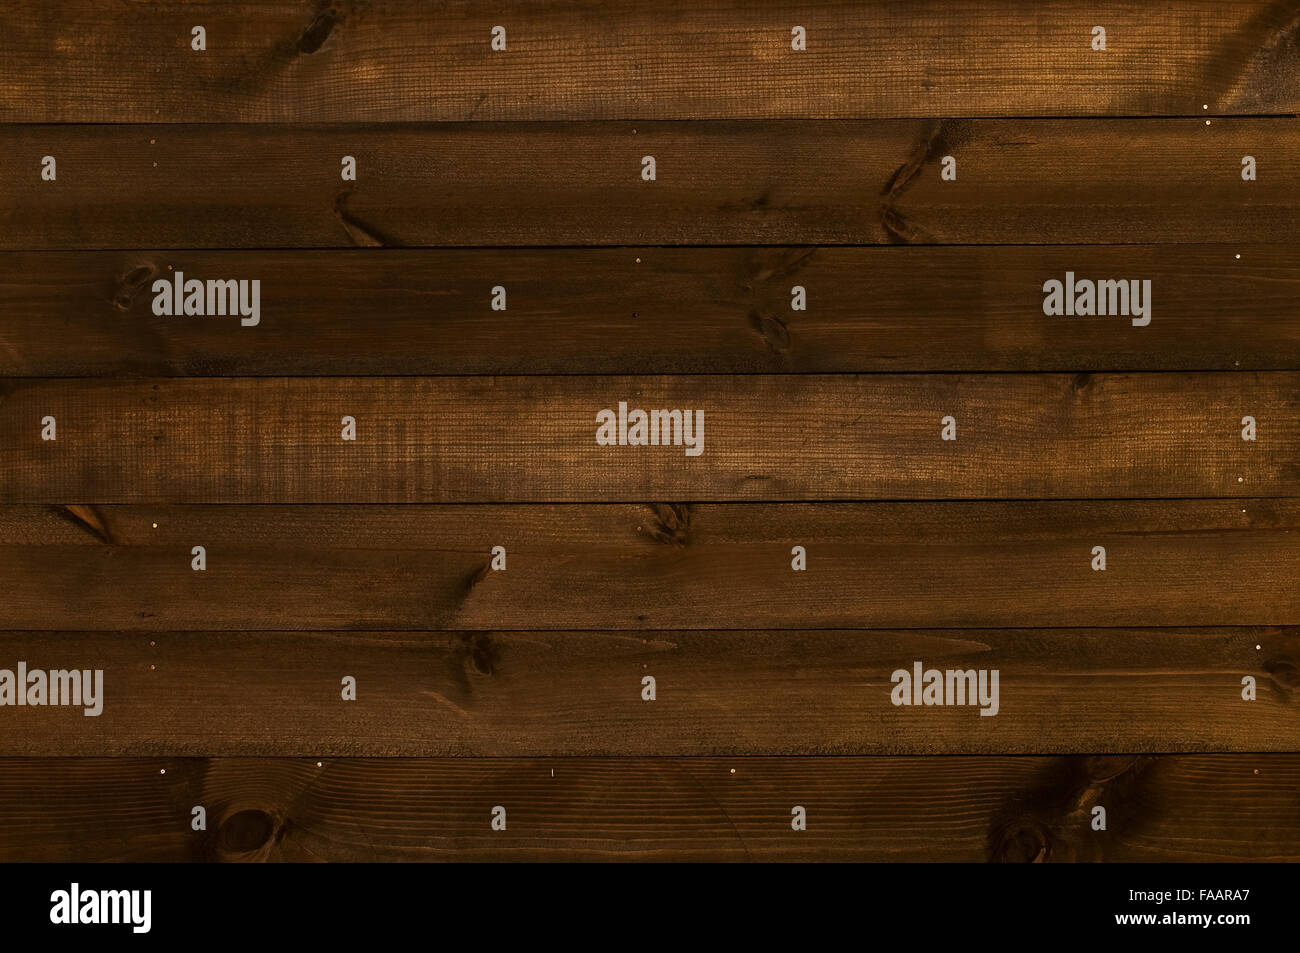 Wooden wall made of poorly processed dark old planks arranged horizontally Stock Photo